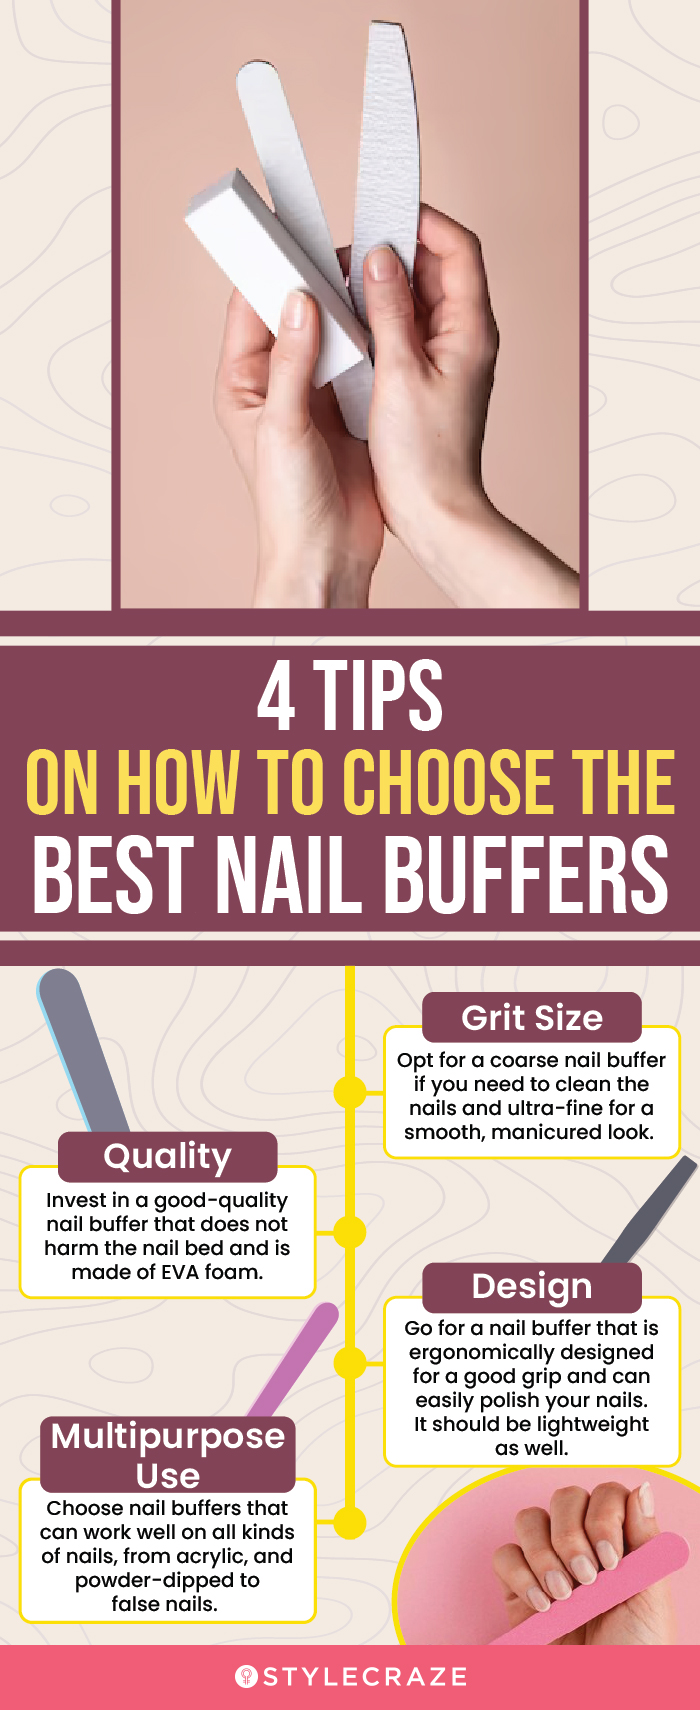 Tips On How To Choose The Best Nail Buffers (infographic)